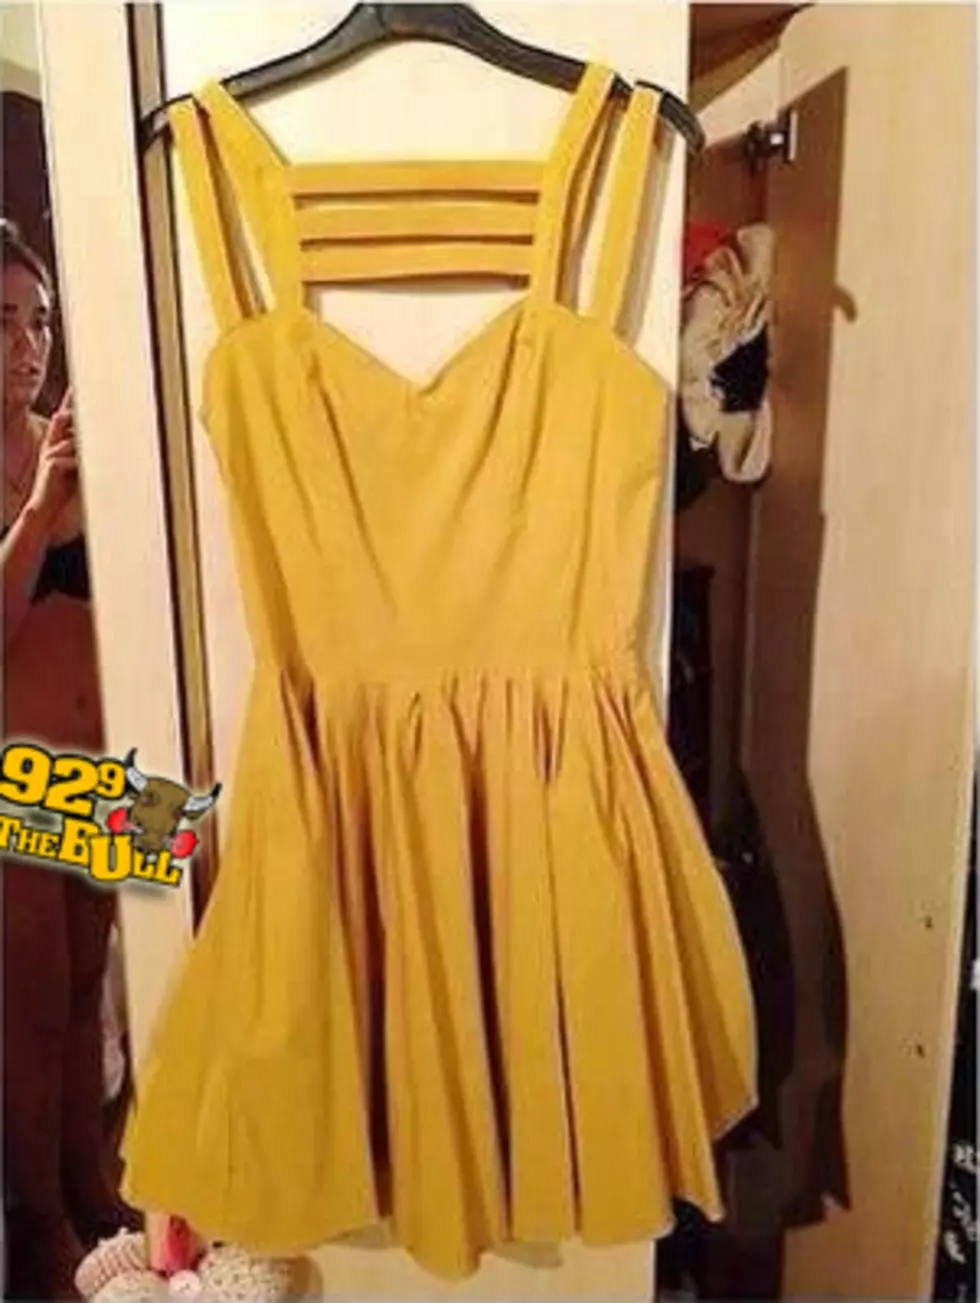 A Posting for a Dress on eBay Went Viral . . . Because the Woman Selling it “Accidentally” Included a Naked Photo of Herself